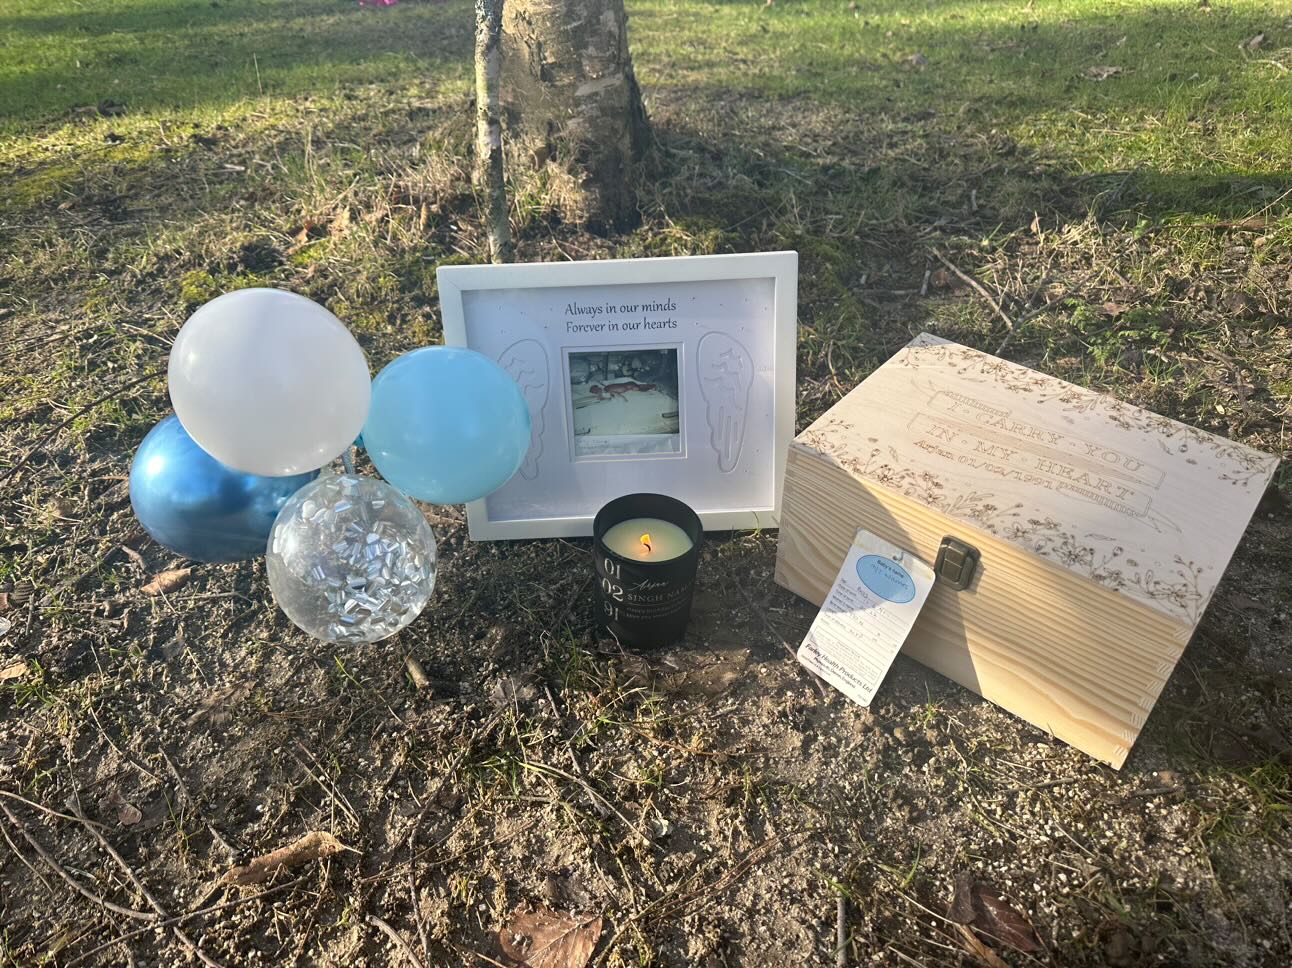 Image of the location where Arjan's ashes are scattered and remembrance items including a photo of Arjan and candle by a tree